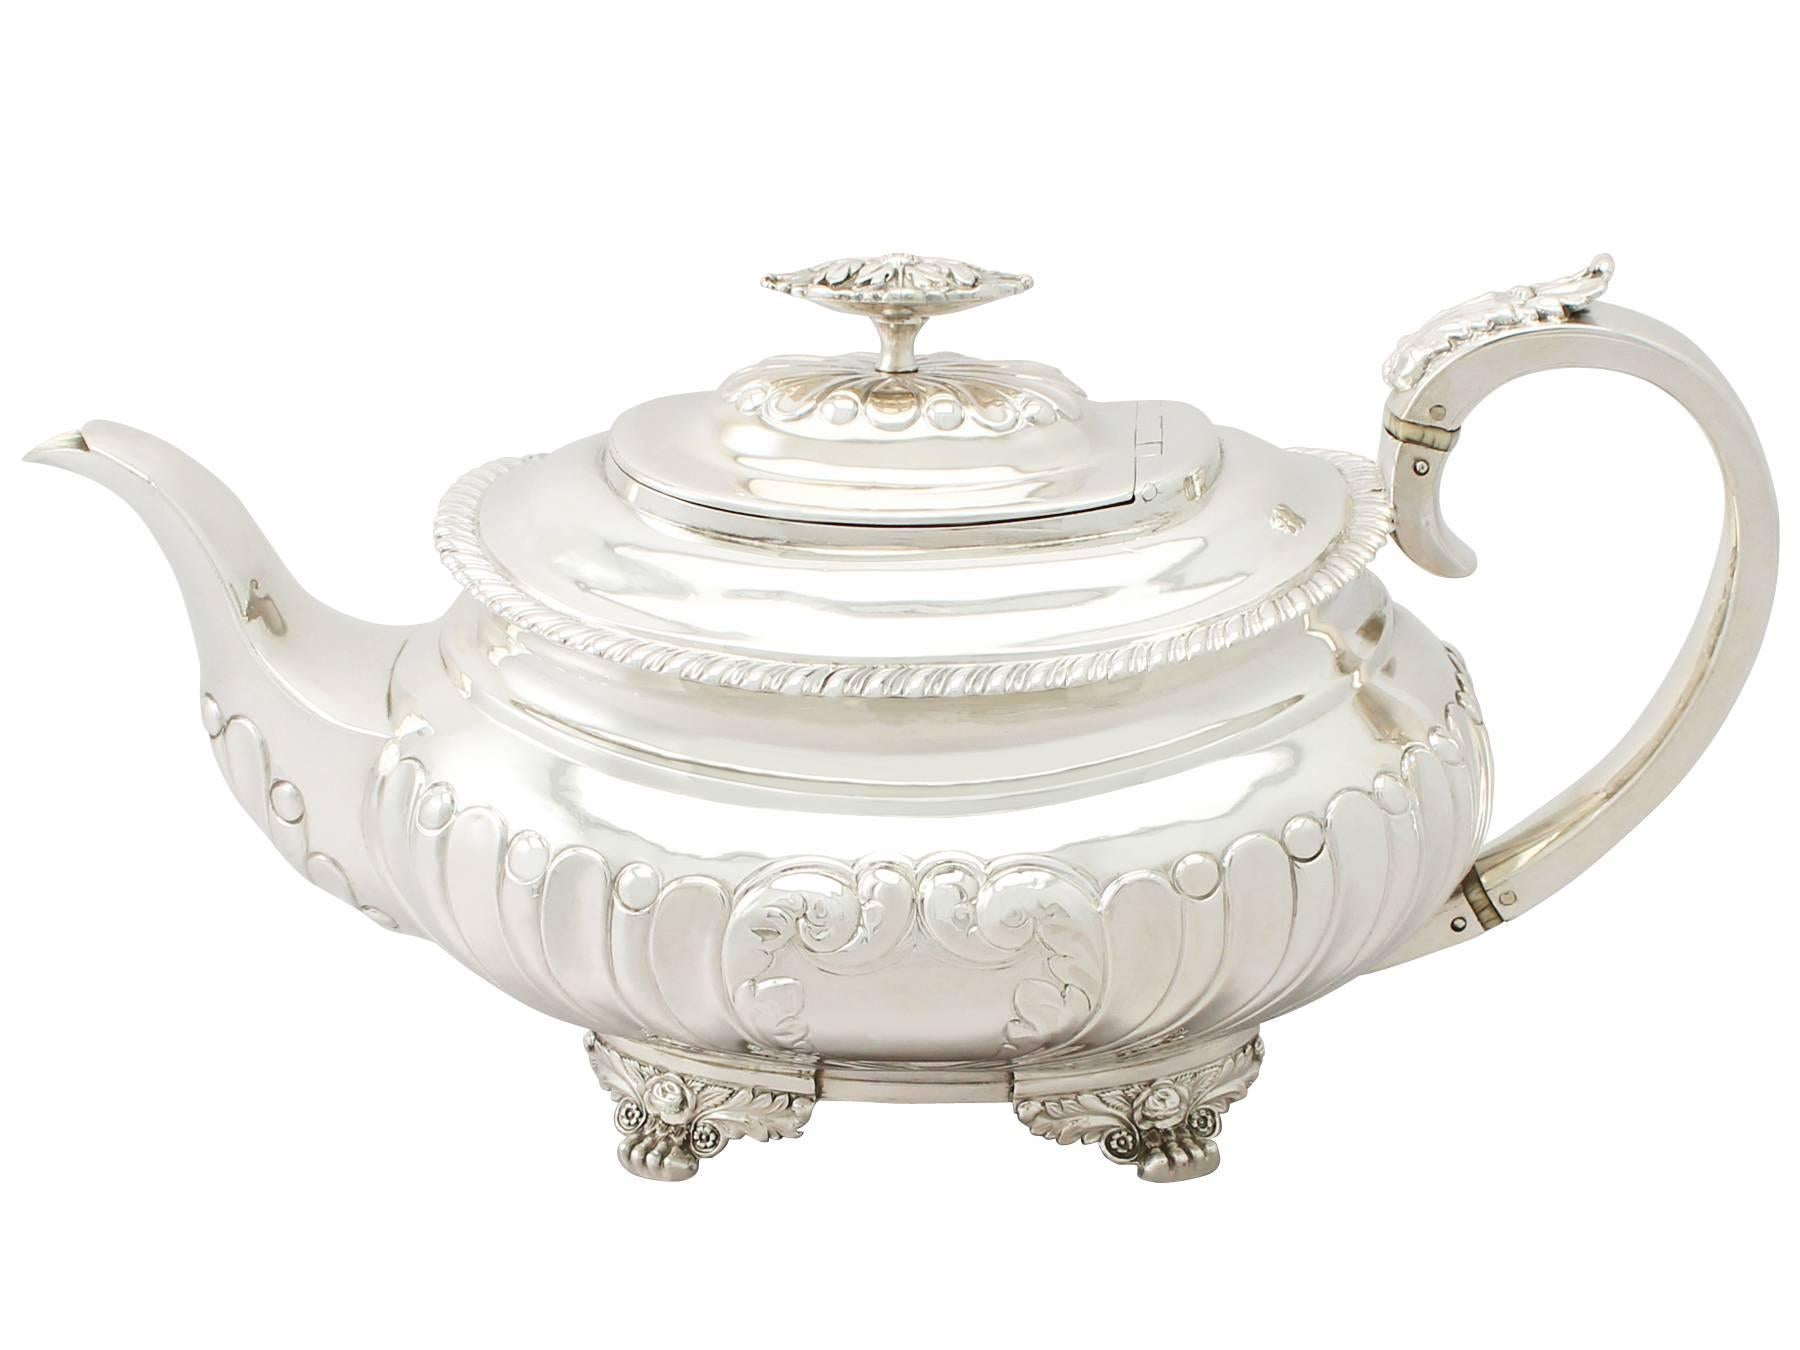 A fine and impressive antique George IV English sterling silver three piece tea set/service made in the Regency style; part of our silver teaware collection.

This impressive antique George IV 3 piece silver tea set consist of a teapot, cream jug